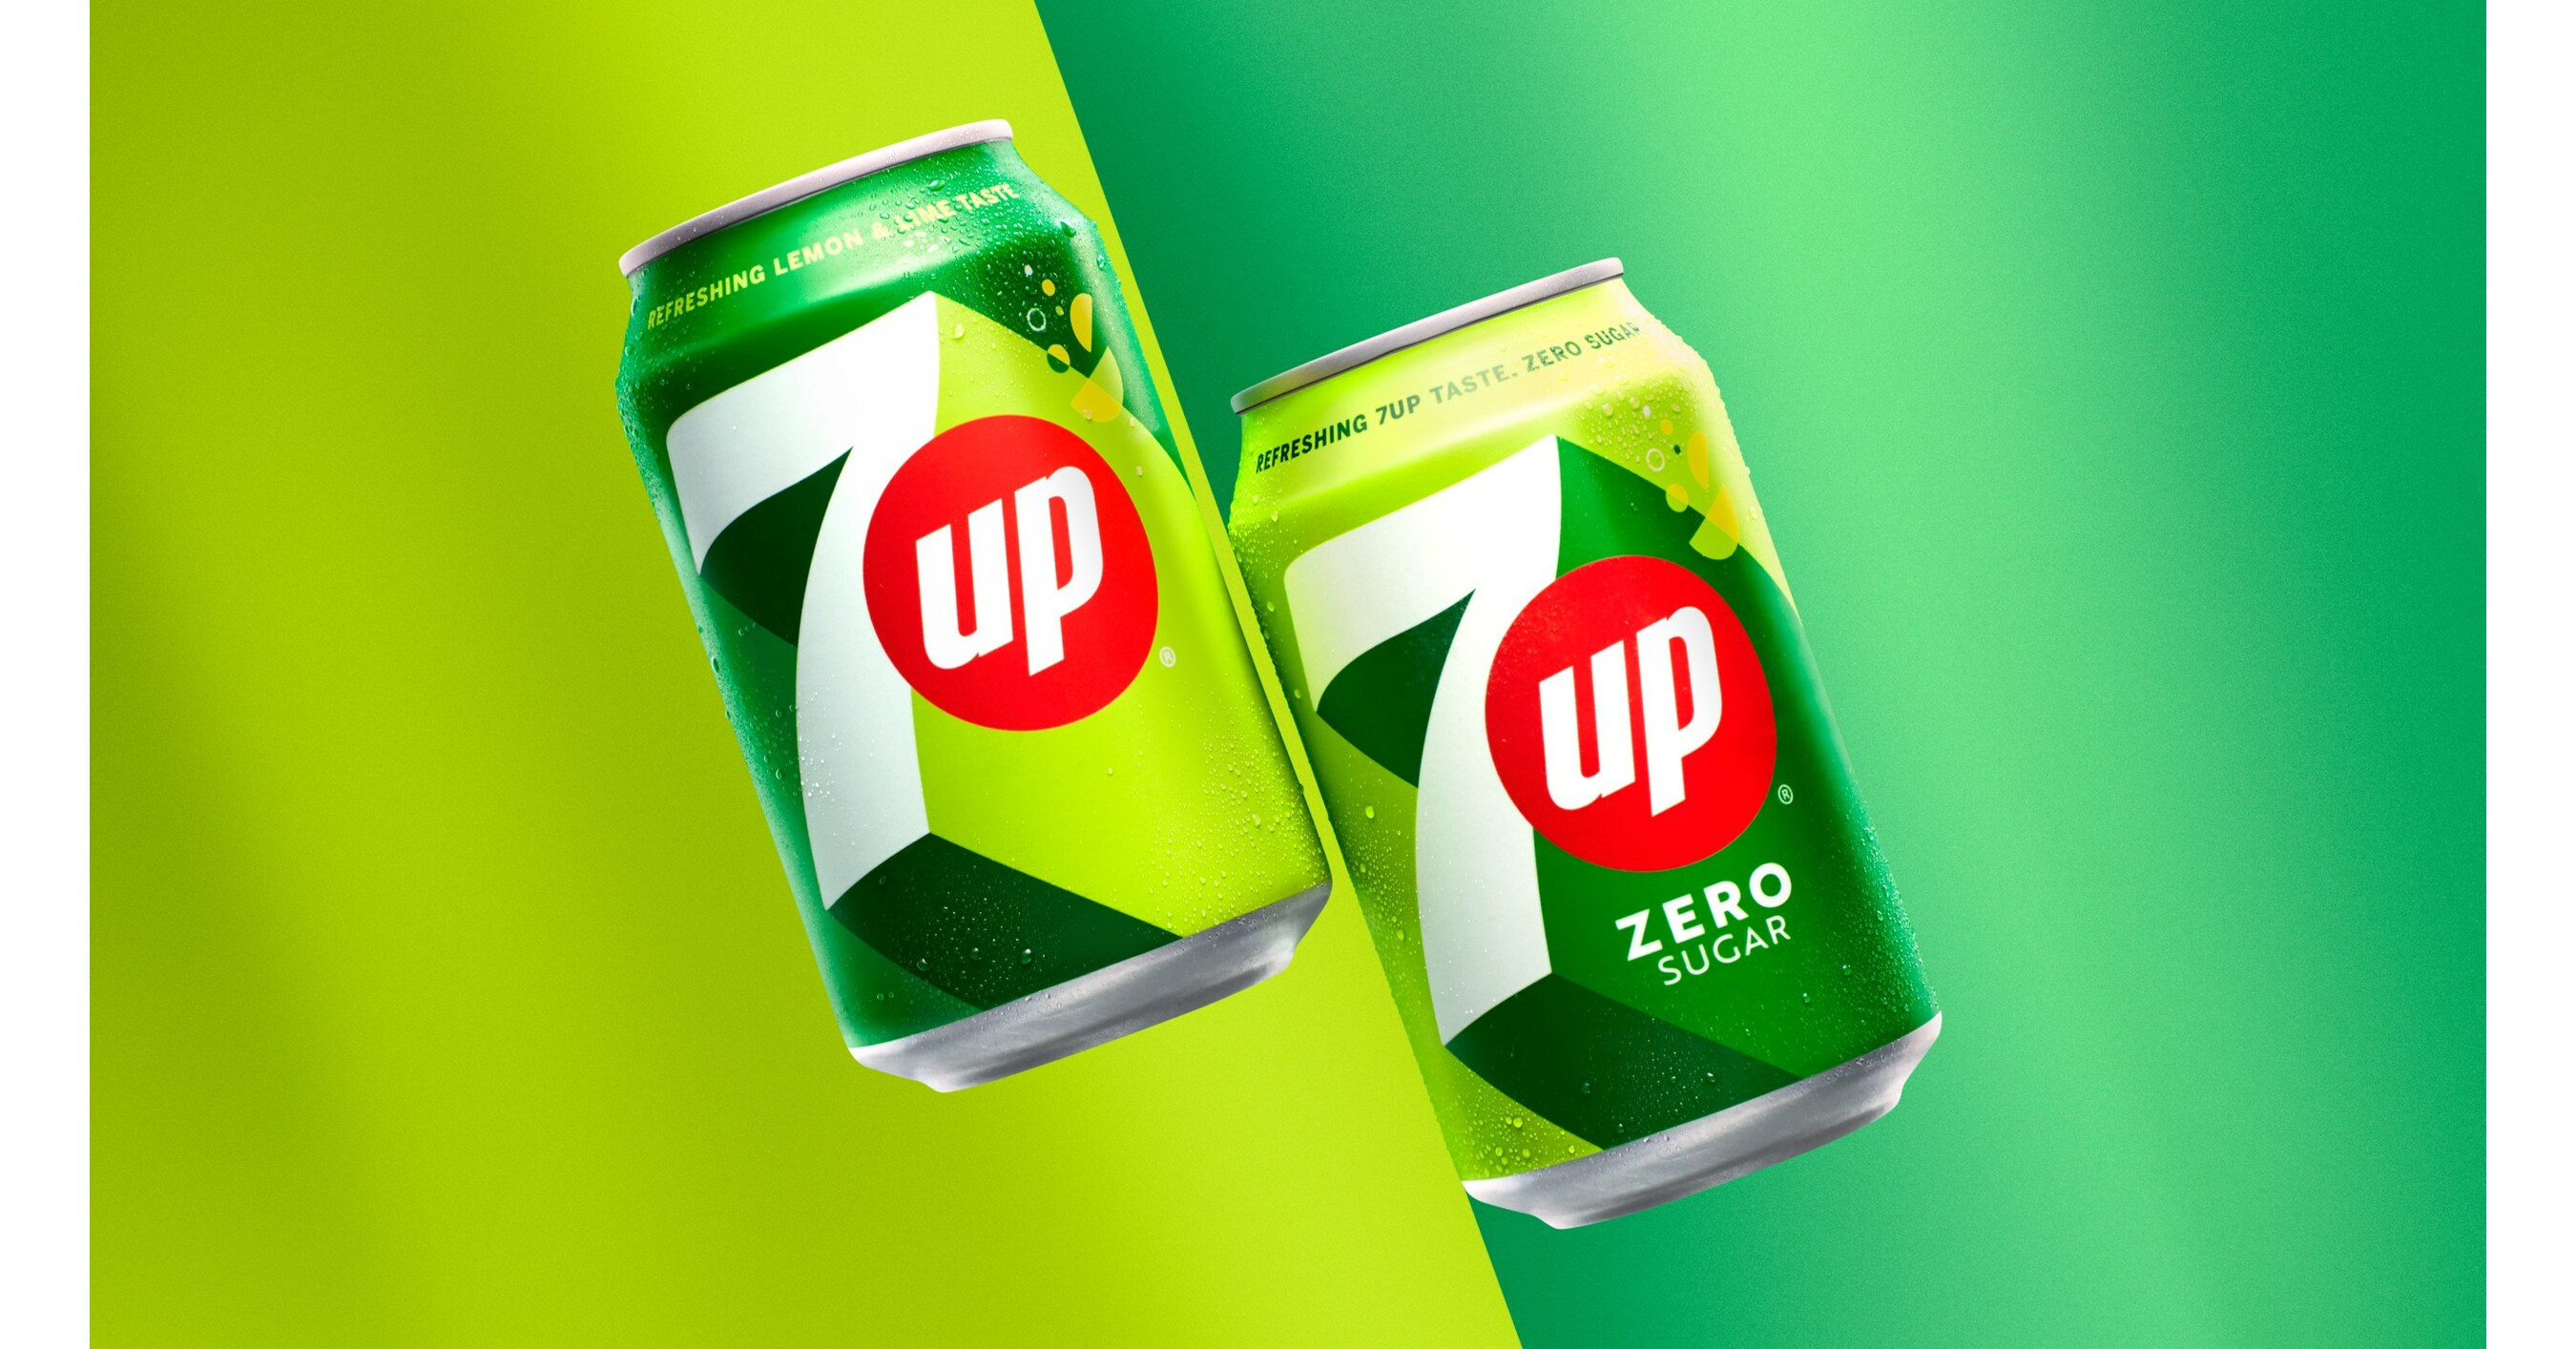 7UP® IS SPREADING MOMENTS OF UPLIFTMENT WITH ITS INTERNATIONAL POSITIONING  AND REFRESHING NEW BRAND IDENTITY